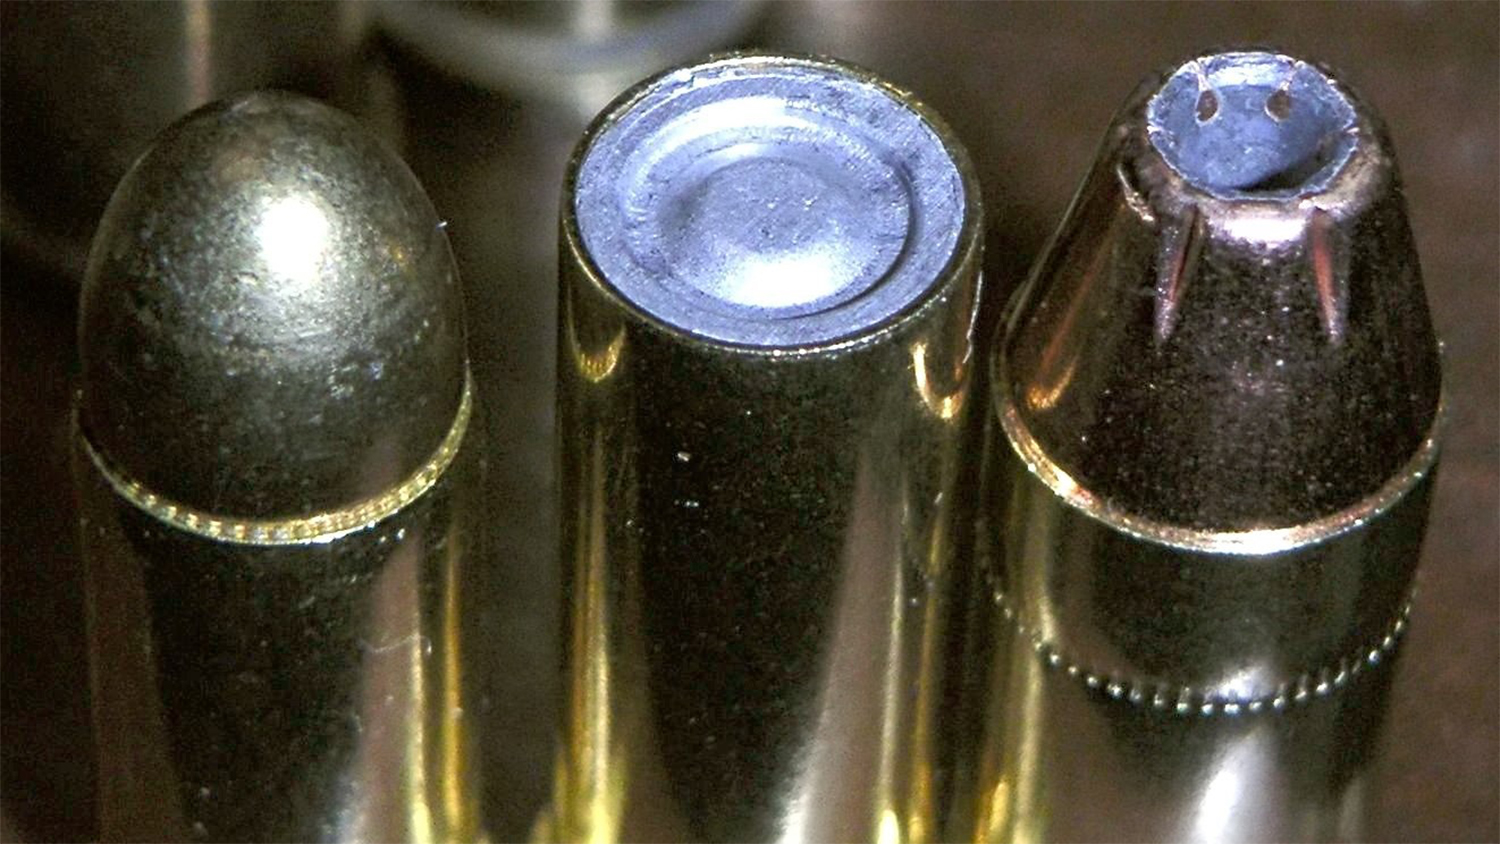 What Are Wadcutter Bullets?